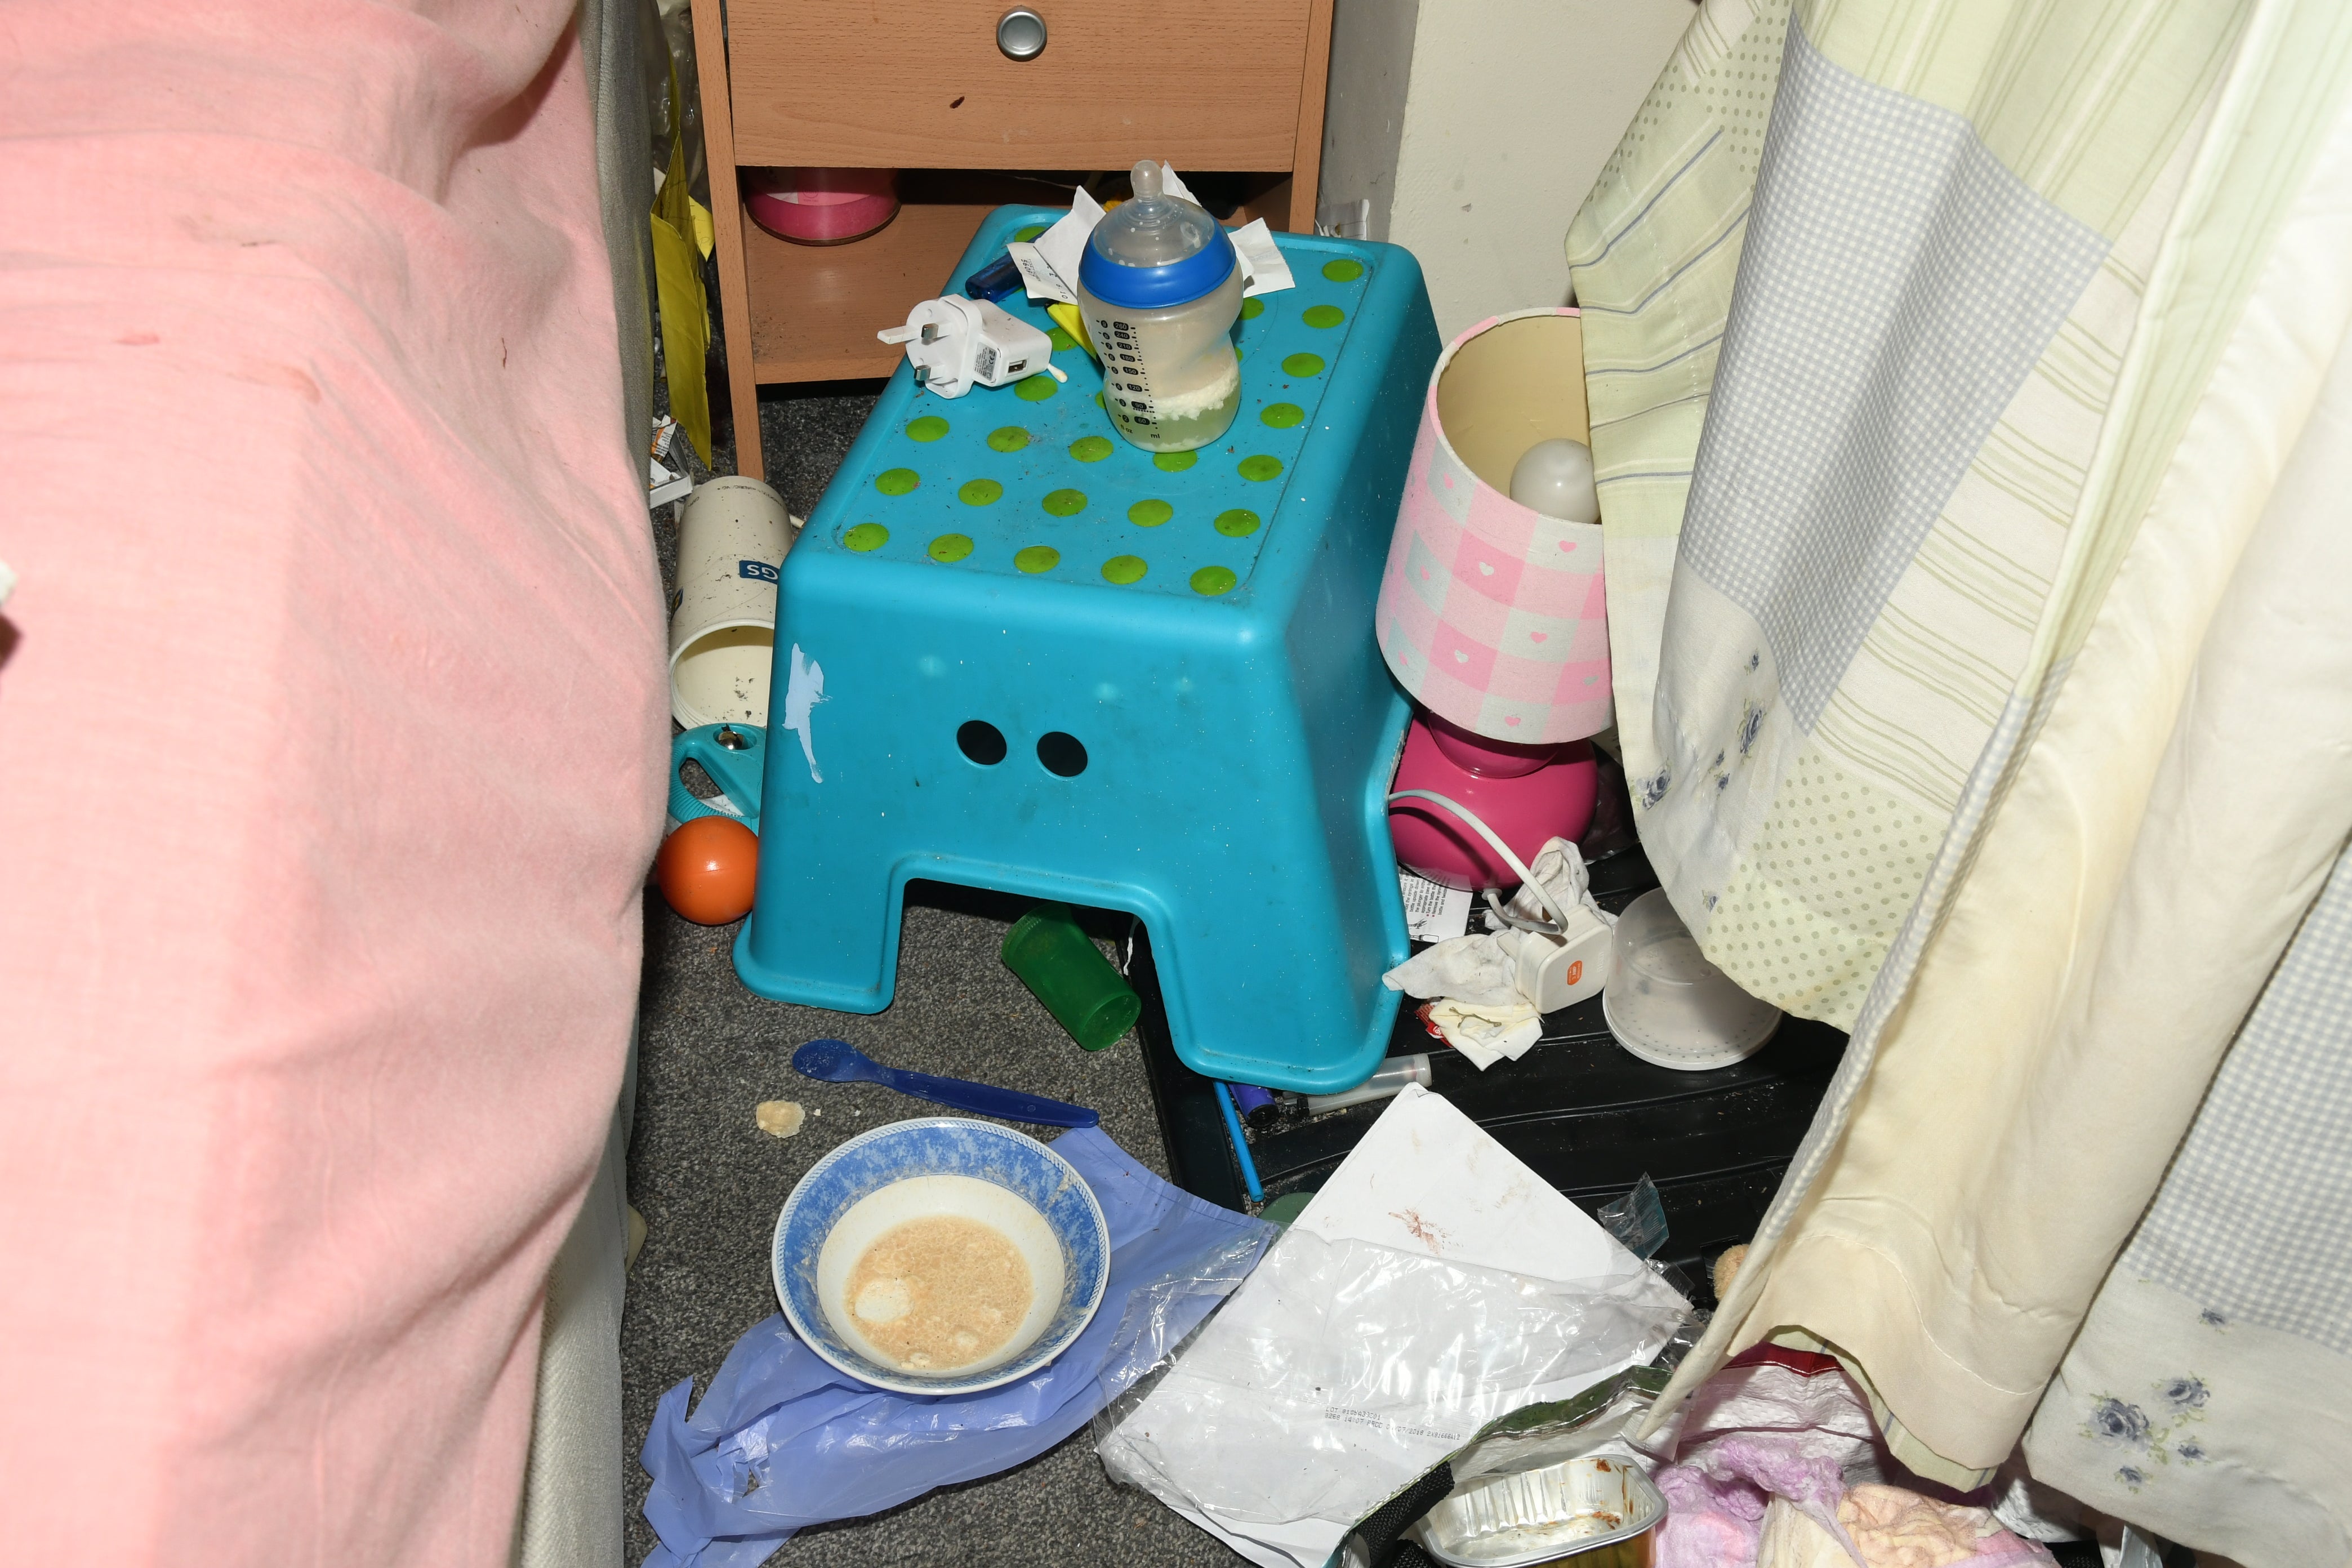 A mouldy baby’s bottle surrounded by litter in Finley’s bedroom